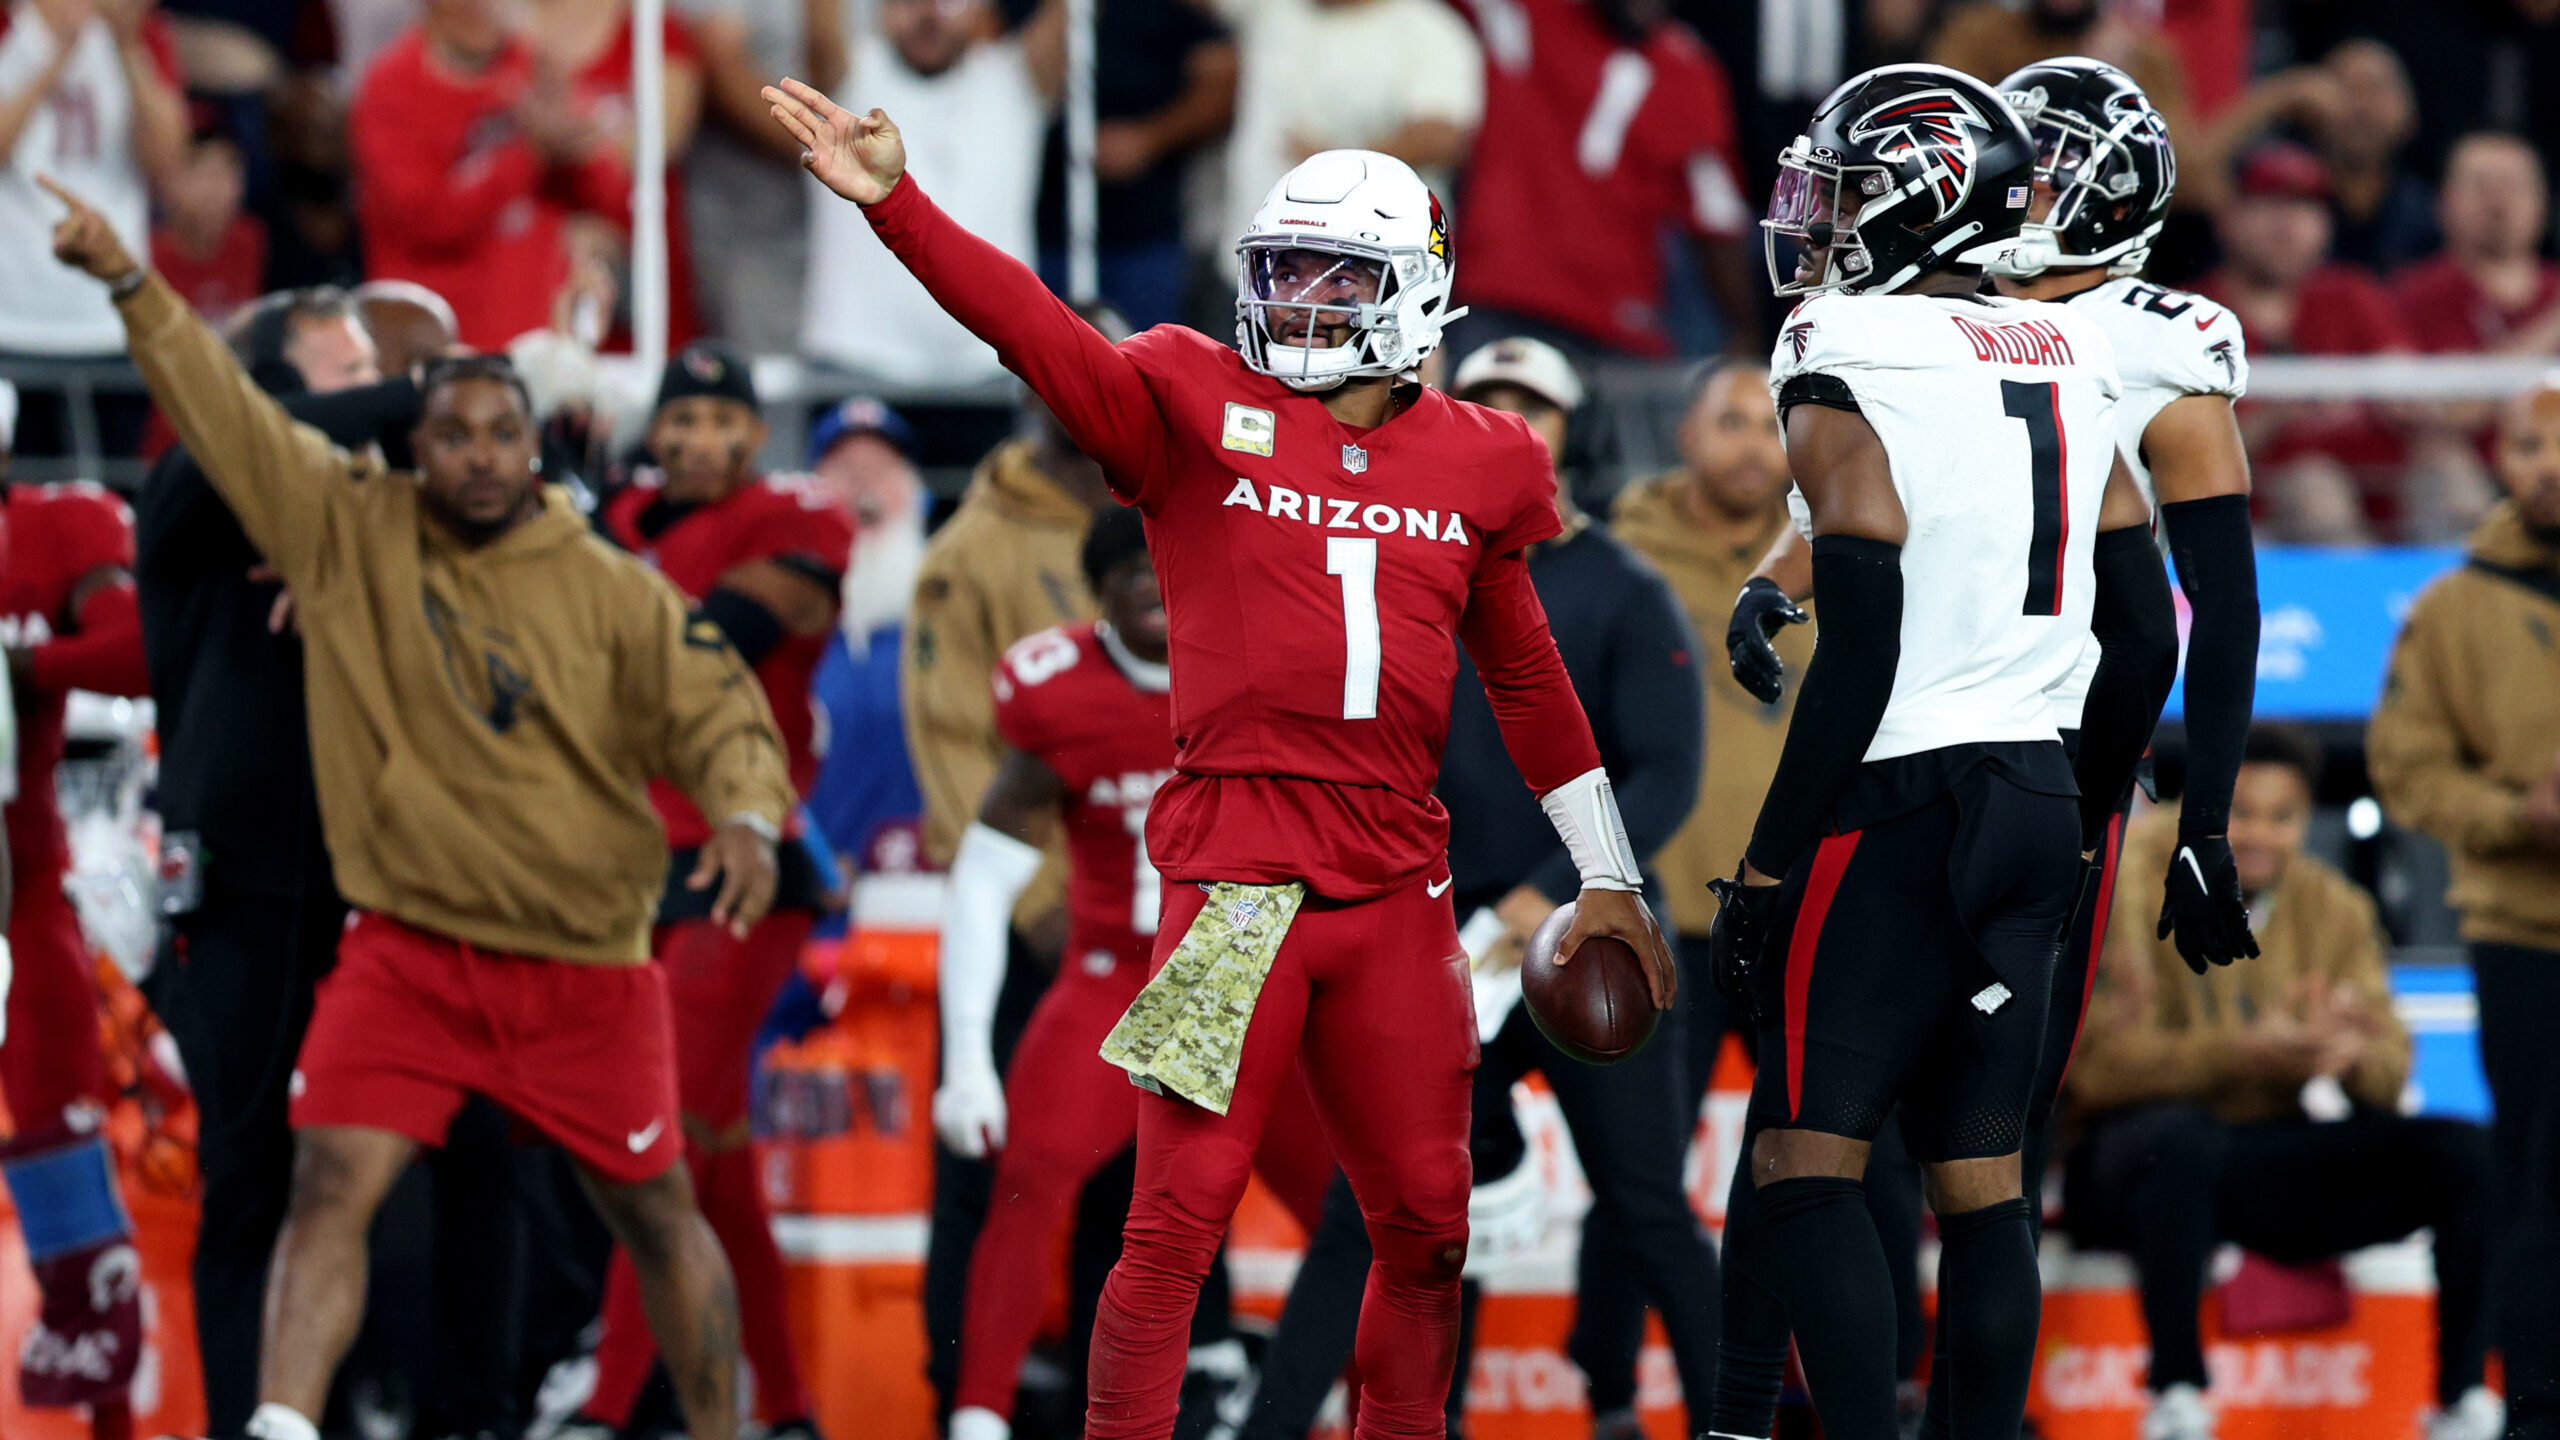 Kyler Murray's return brings back the Cardinals' prized player to the Valley